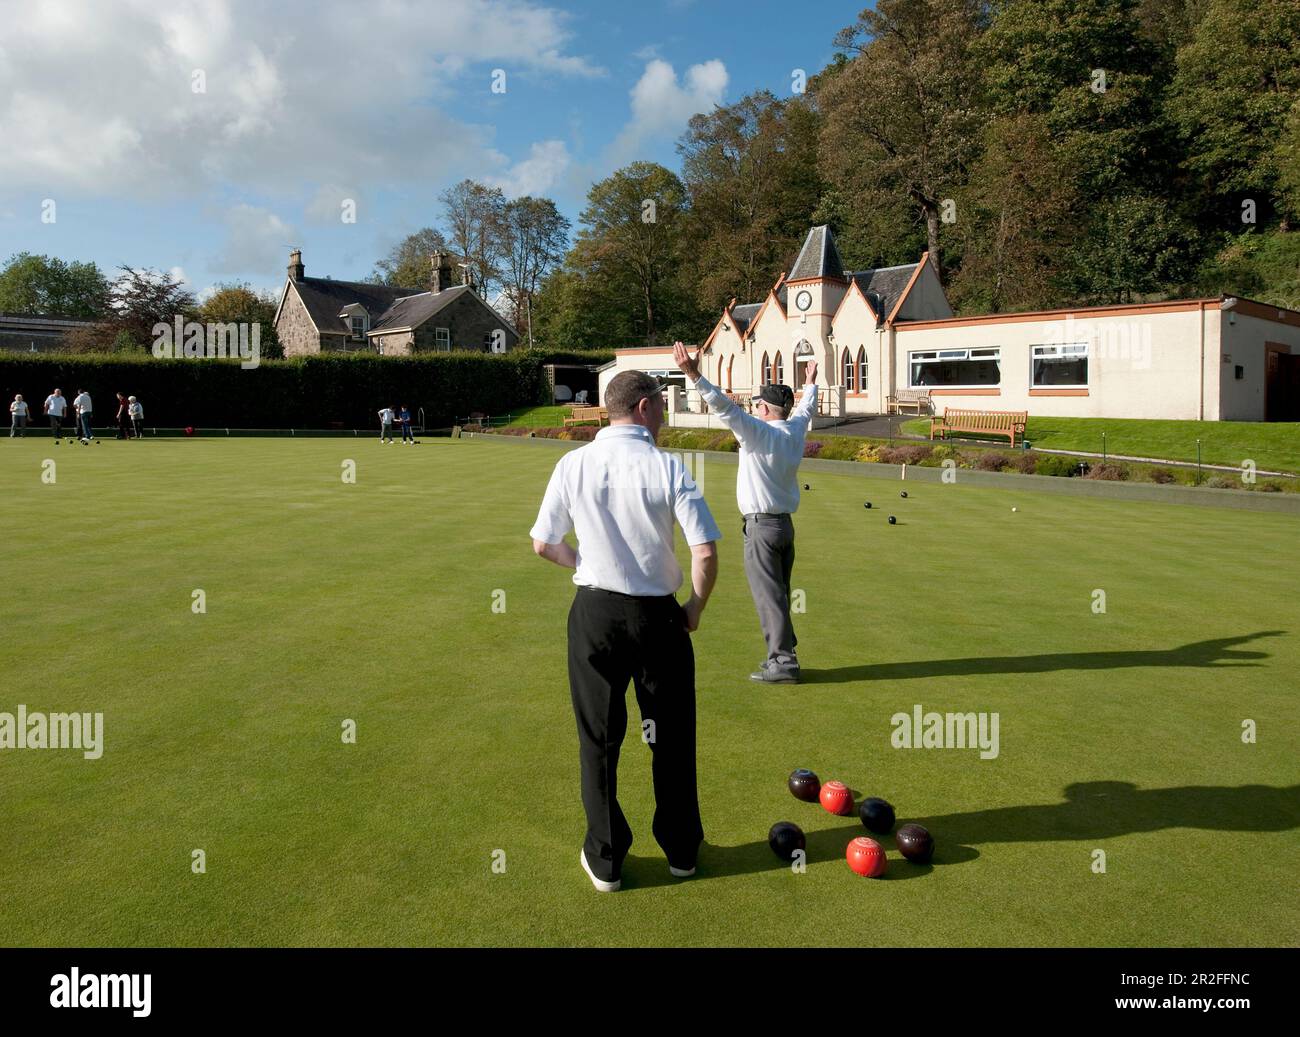 A man raises his arms in victory during Bowls in play in front of the pavilion of the Stirling lawn bowling club green in Stirling, Scotland, UK Stock Photo